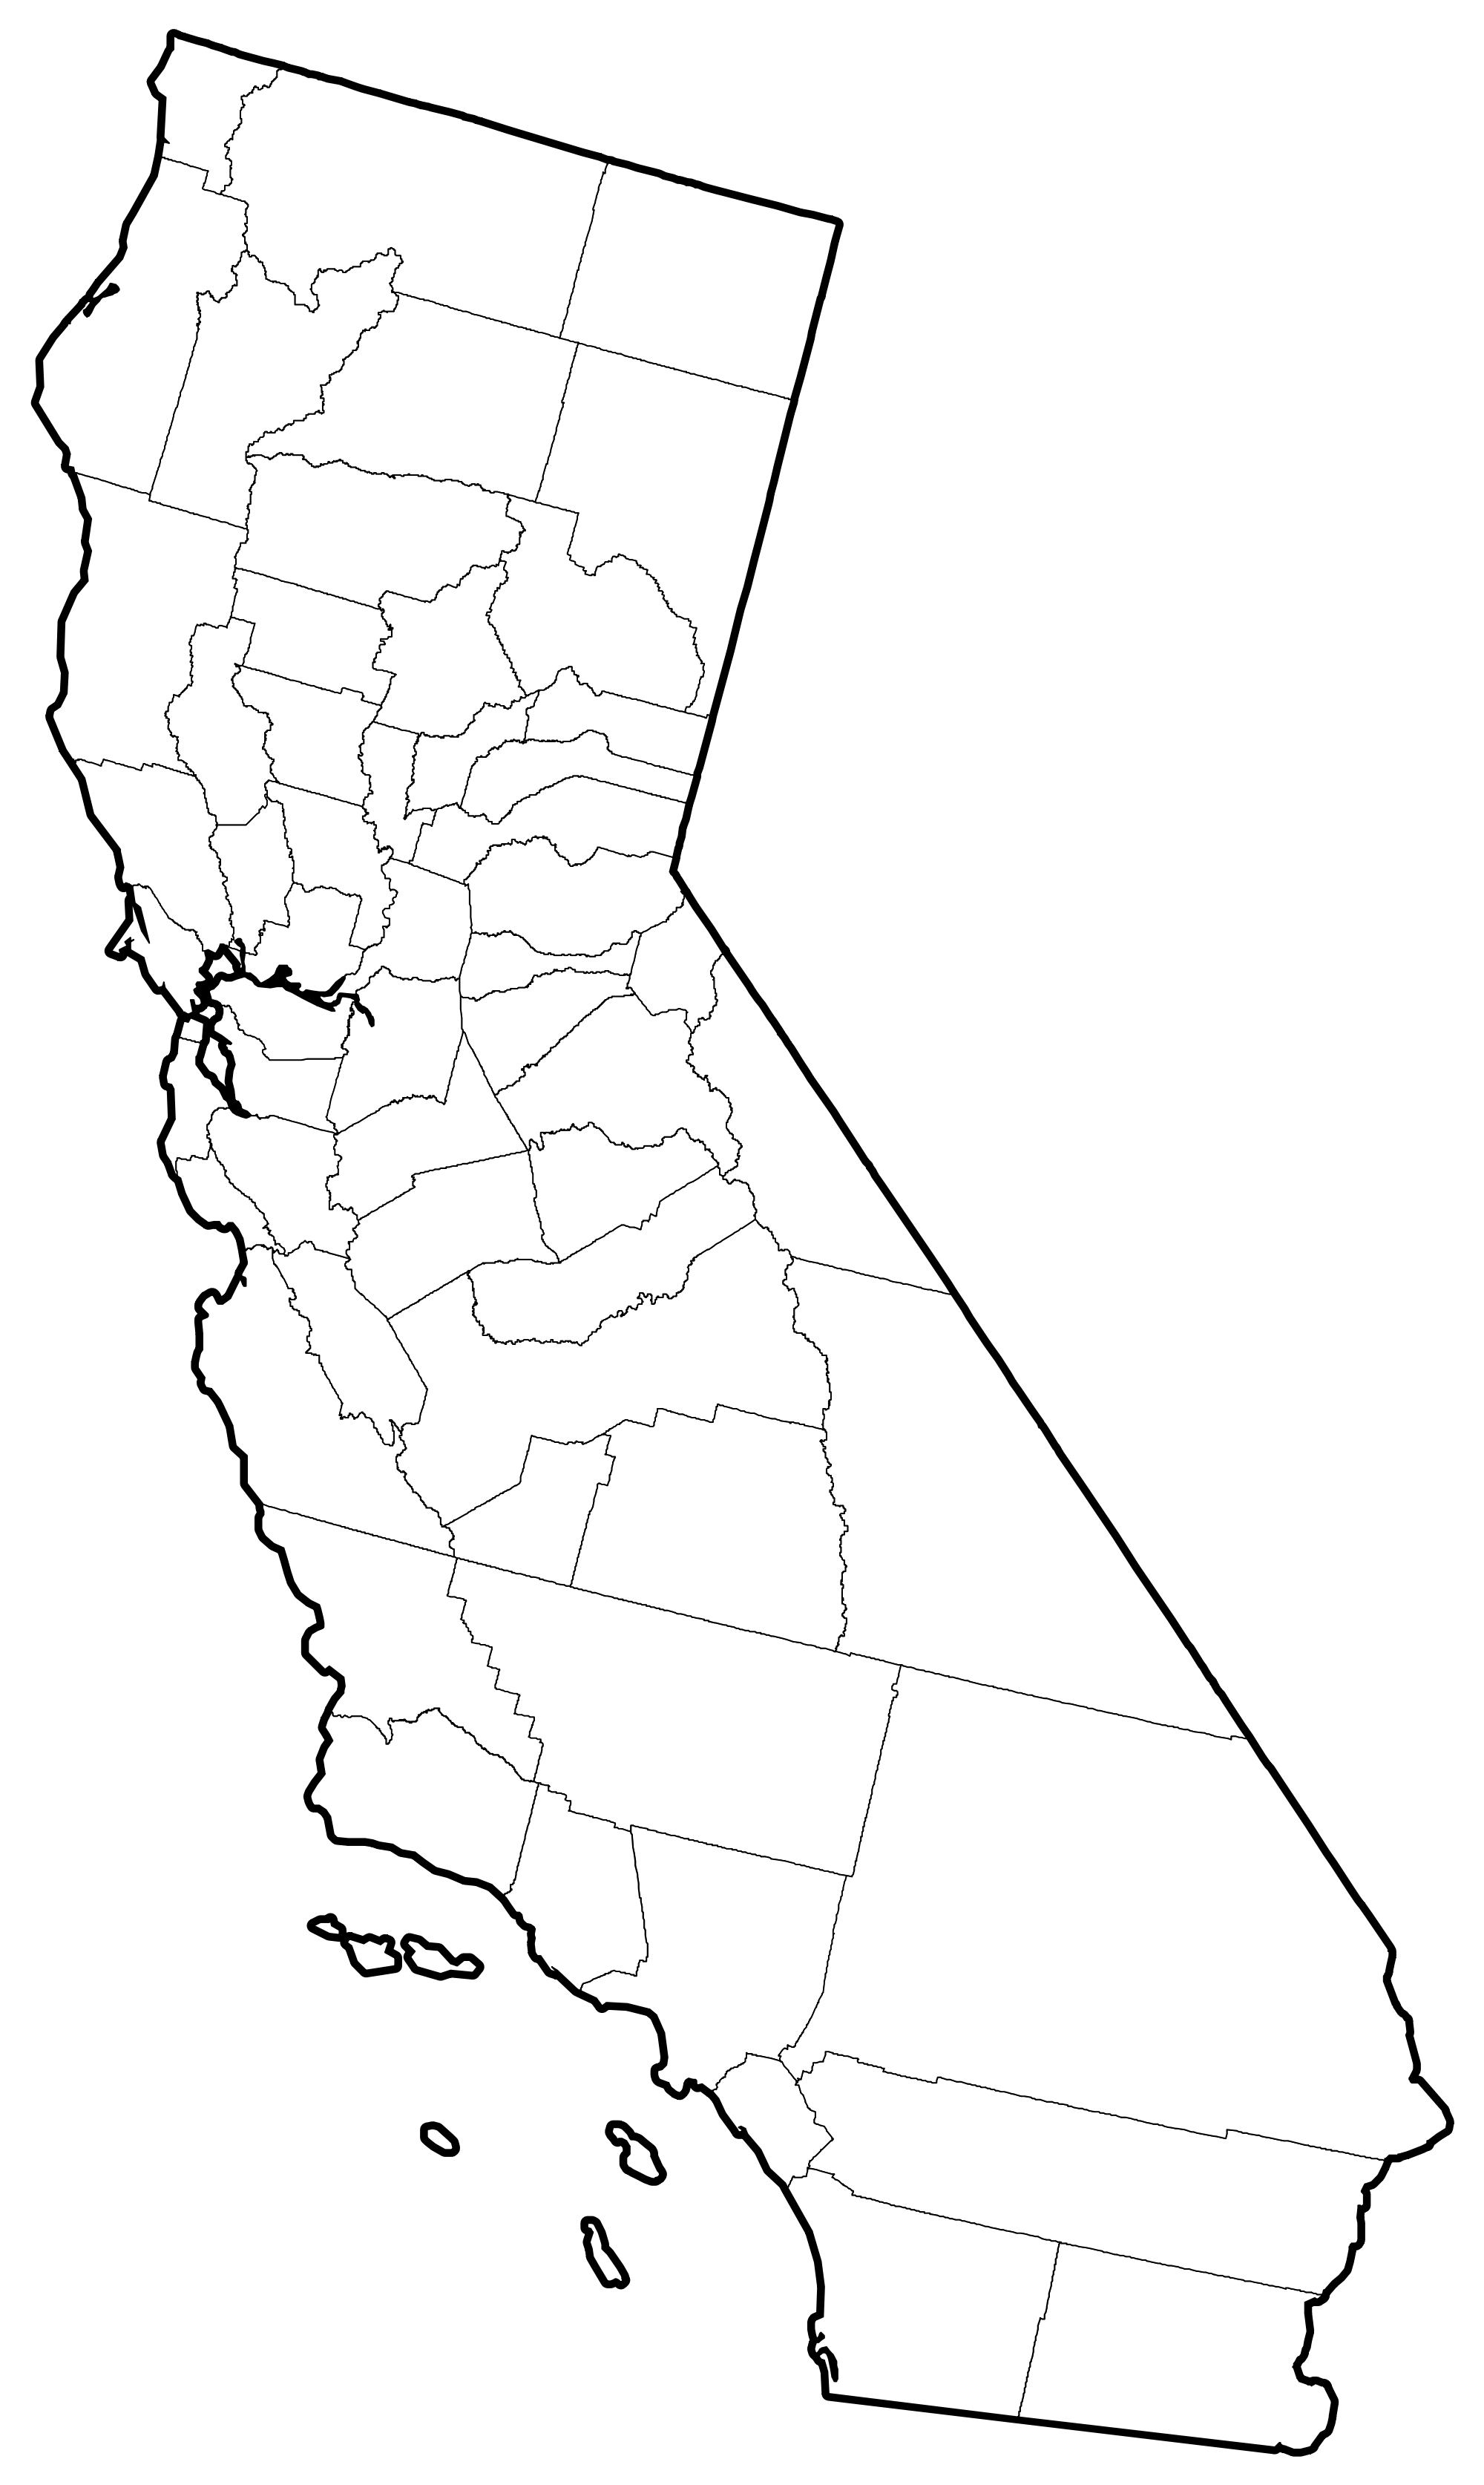 California County Map Outline With Cities | SexiezPicz Web Porn